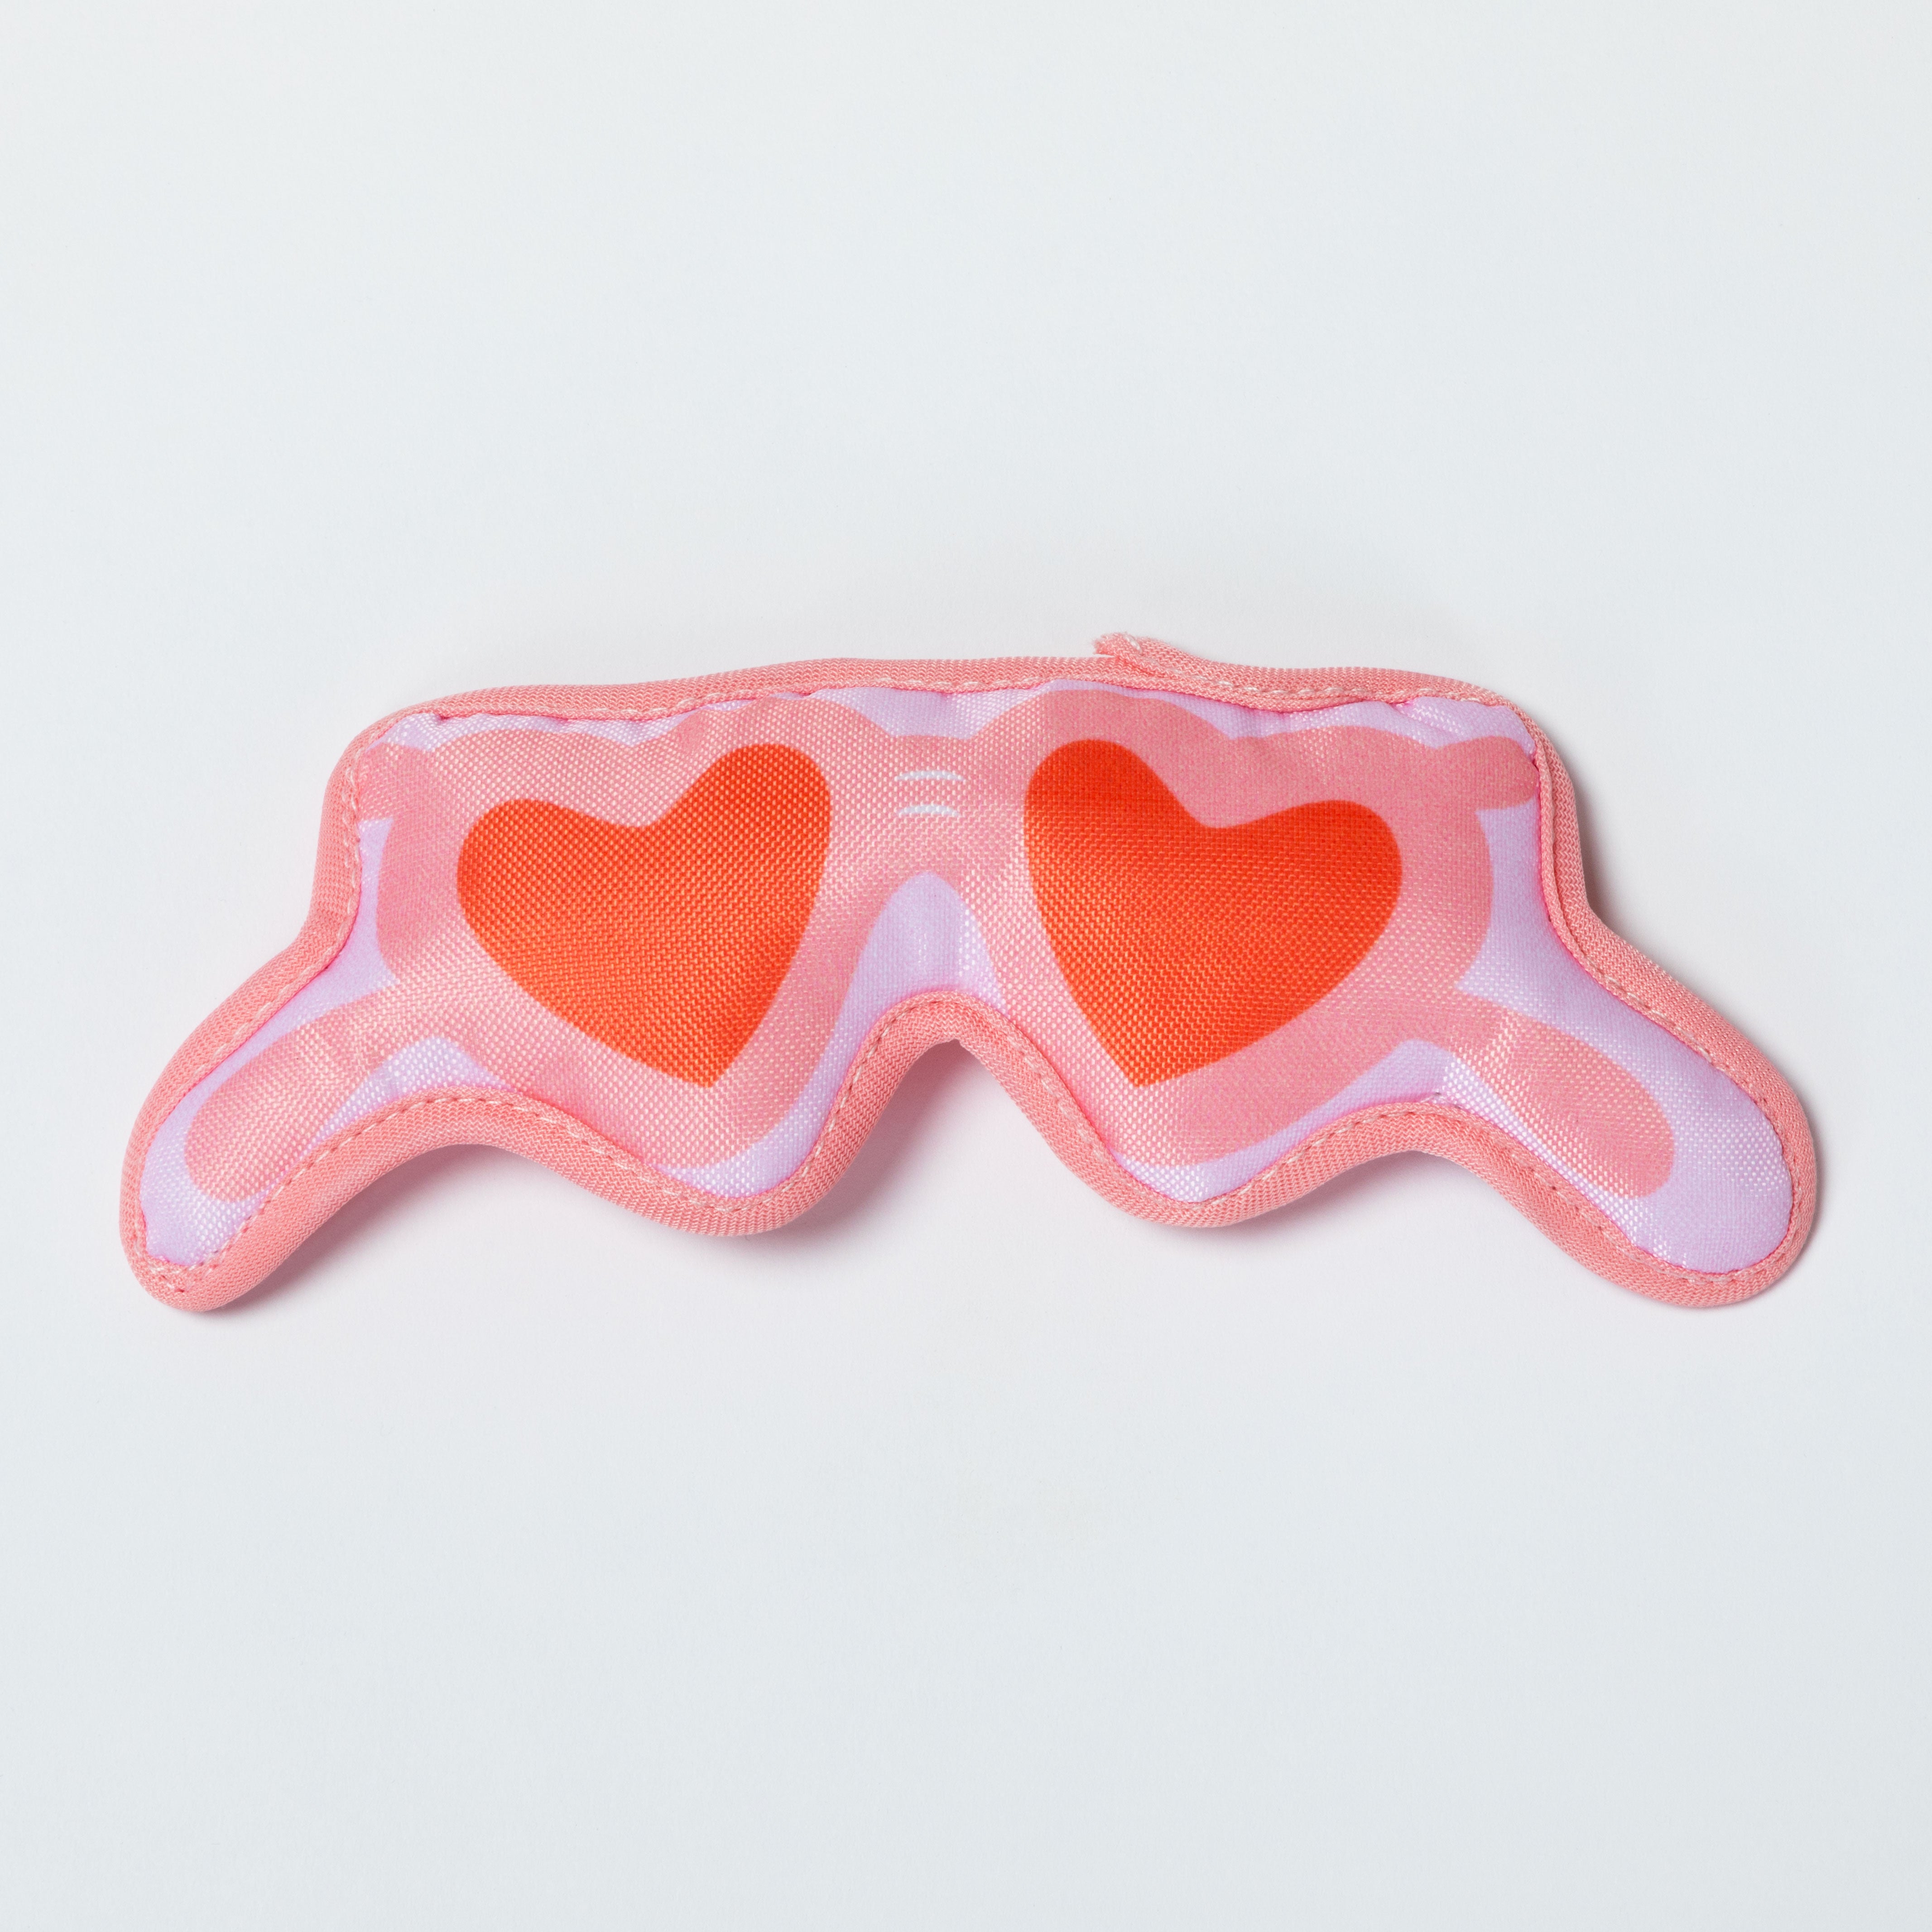 Cash & Coop Heart Sunglasses Dog Toy - S